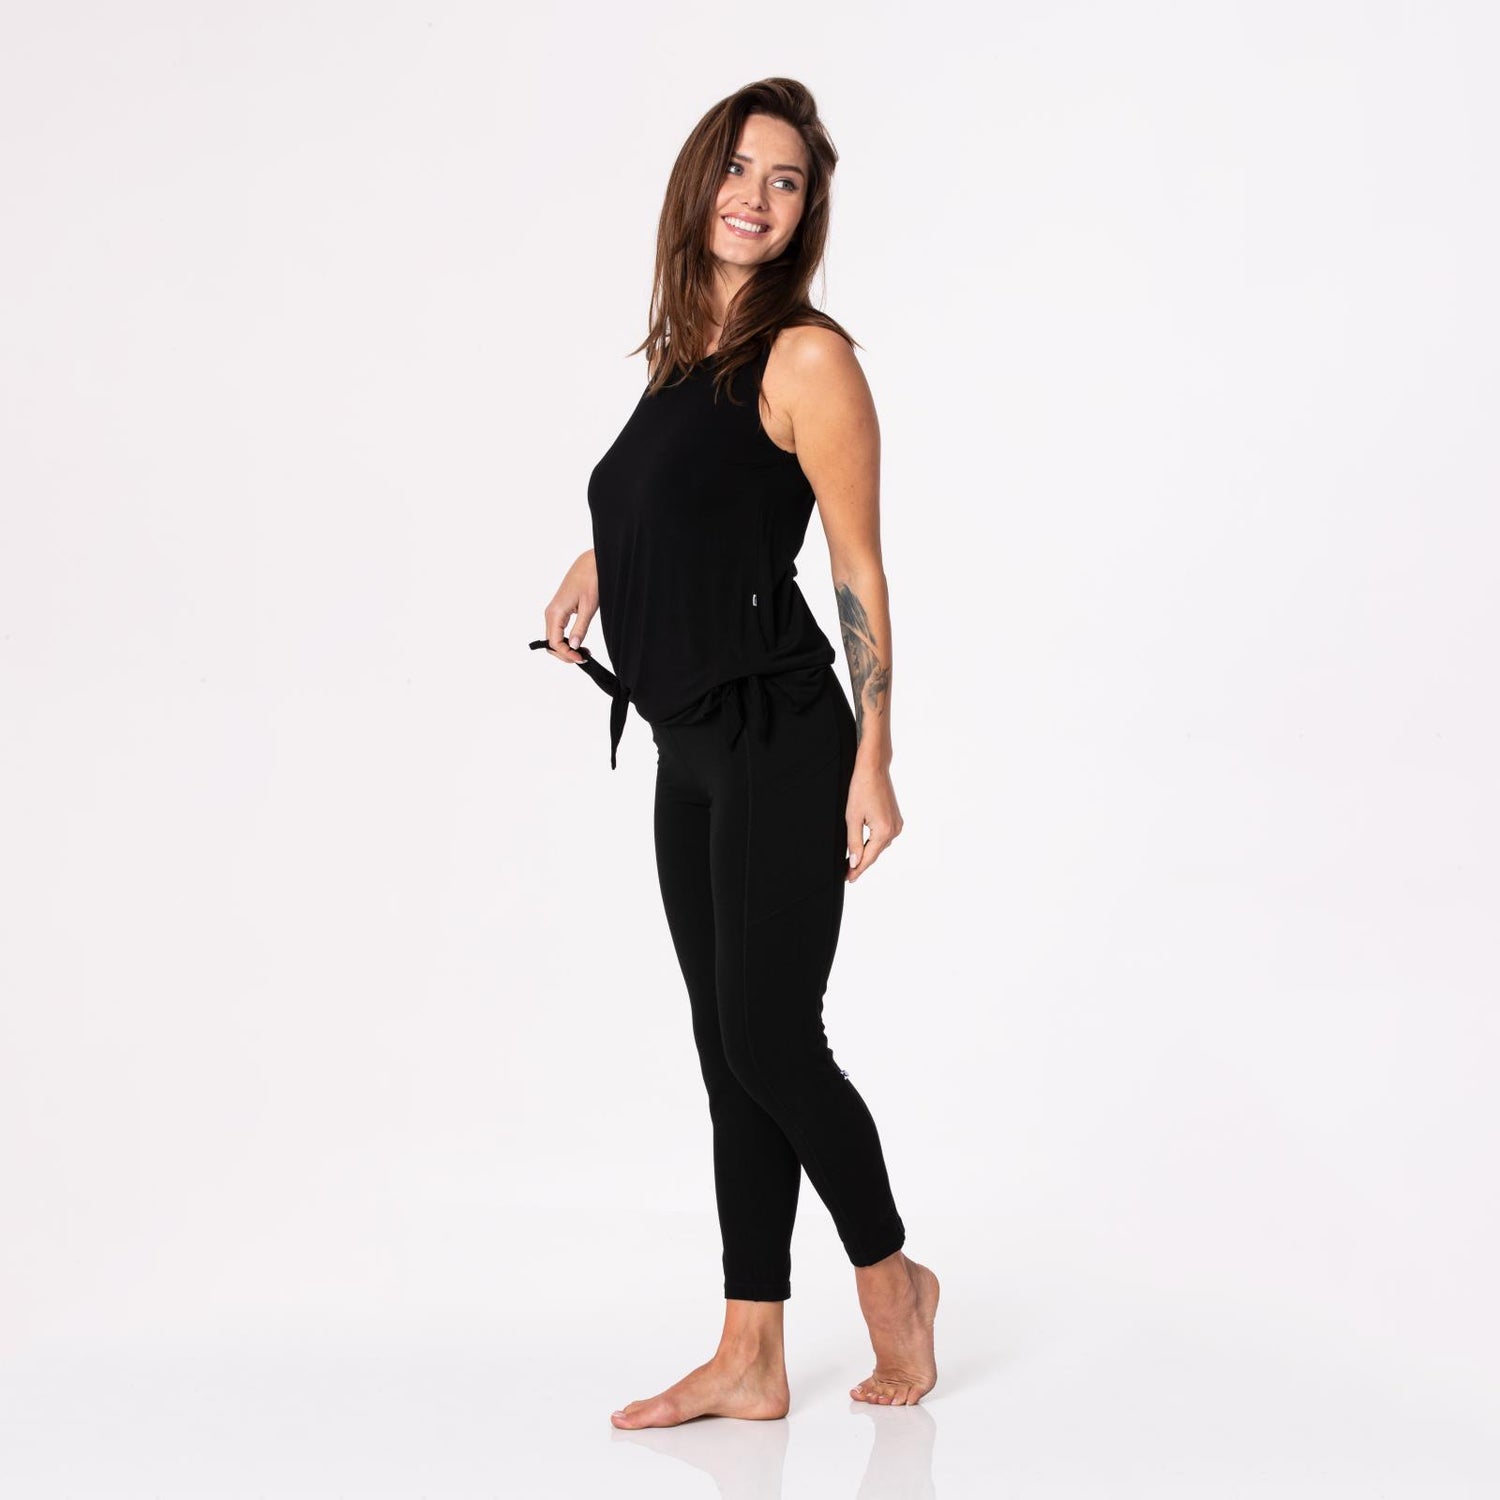 Women's Luxe Stretch 7/8 Leggings with Pockets in Midnight